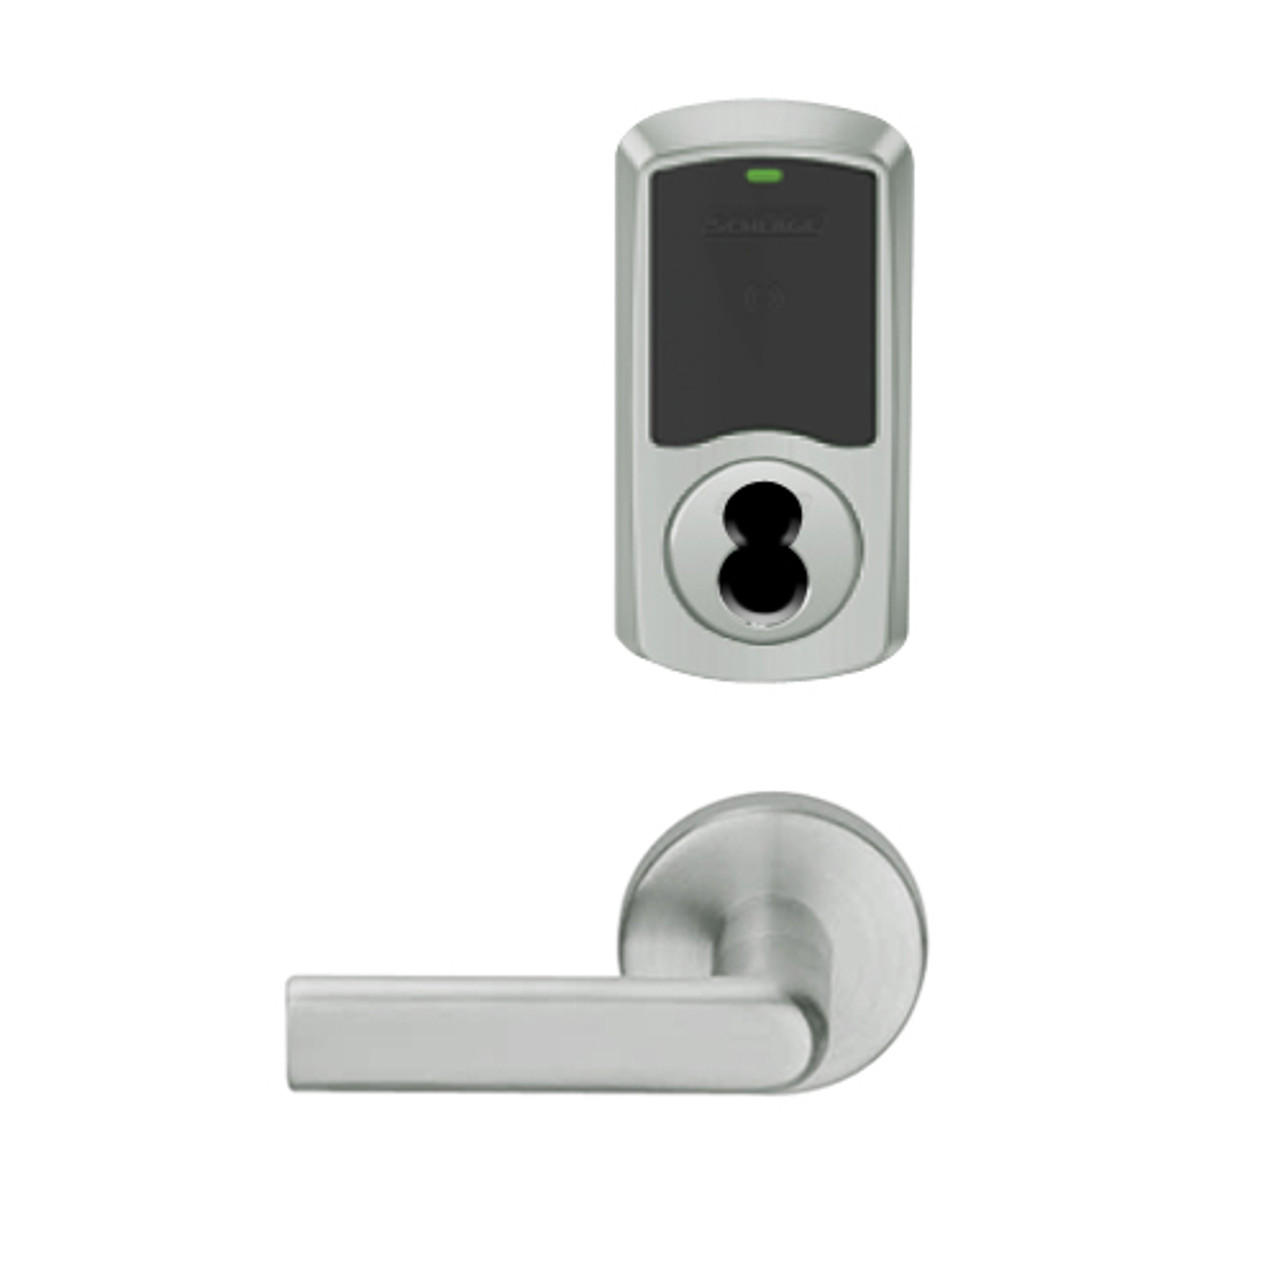 LEMB-GRW-J-01-619-00A Schlage Privacy/Office Wireless Greenwich Mortise Lock with Push Button & LED Indicator and 01 Lever Prepped for FSIC in Satin Nickel